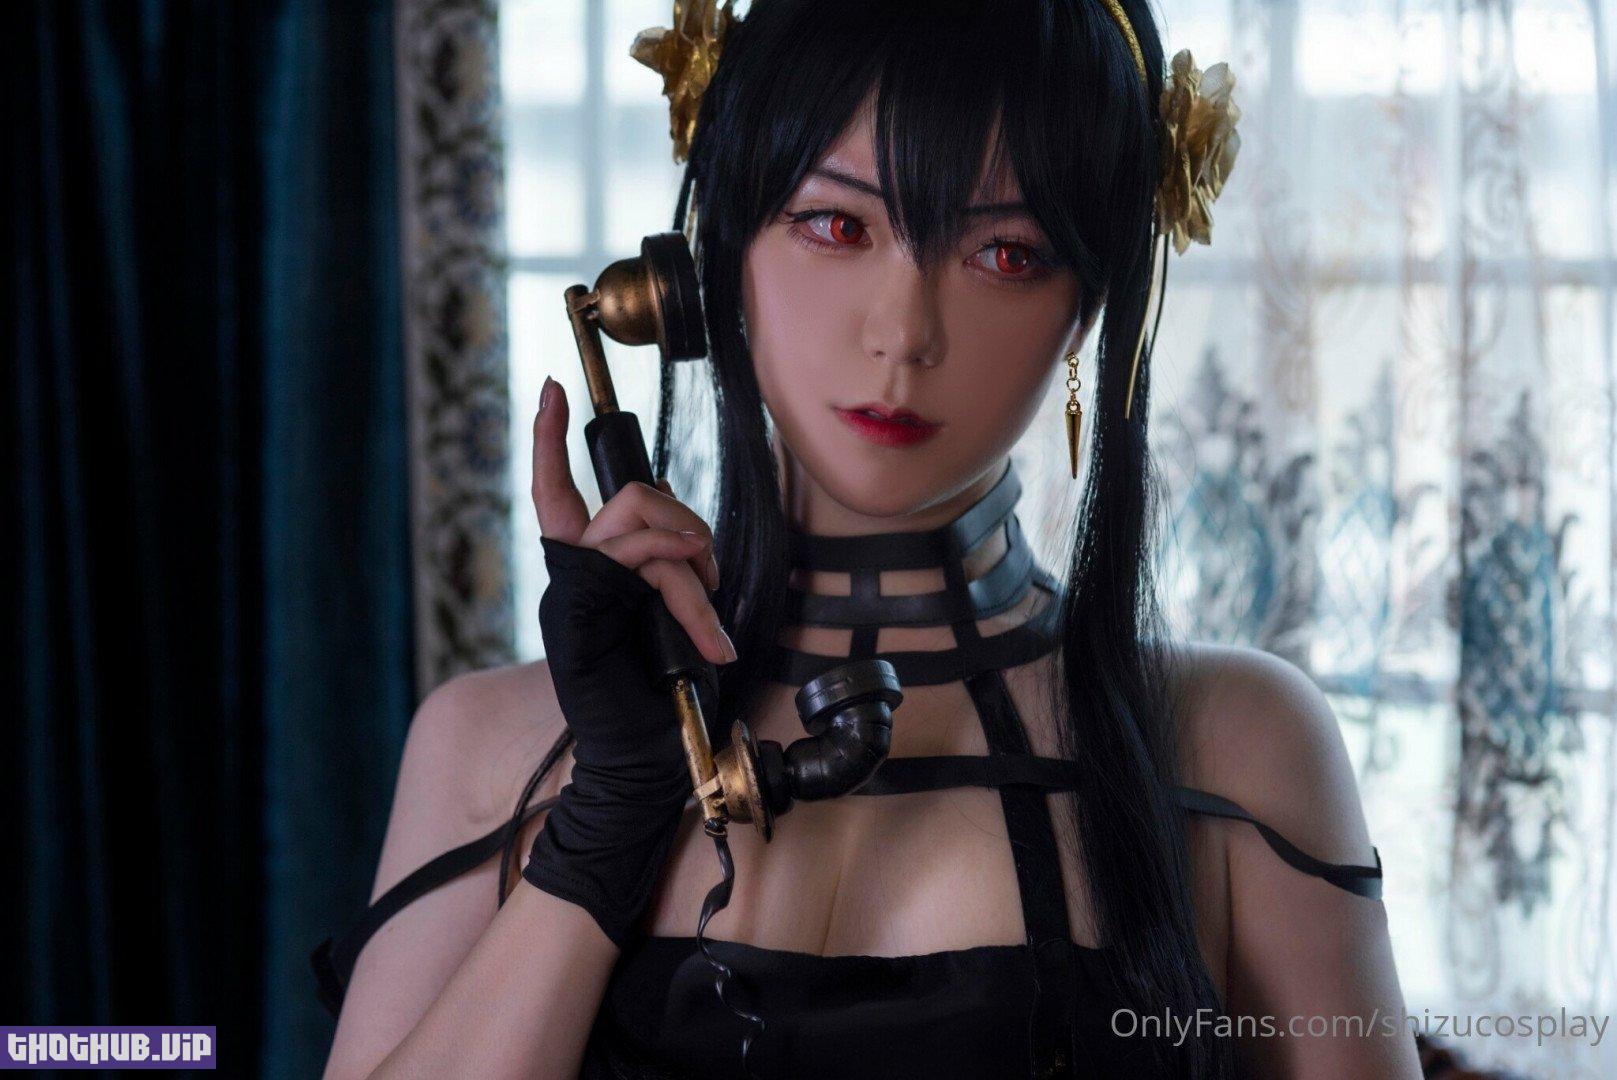 Shizu (shizucosplay) Onlyfans Leaks (23 images)